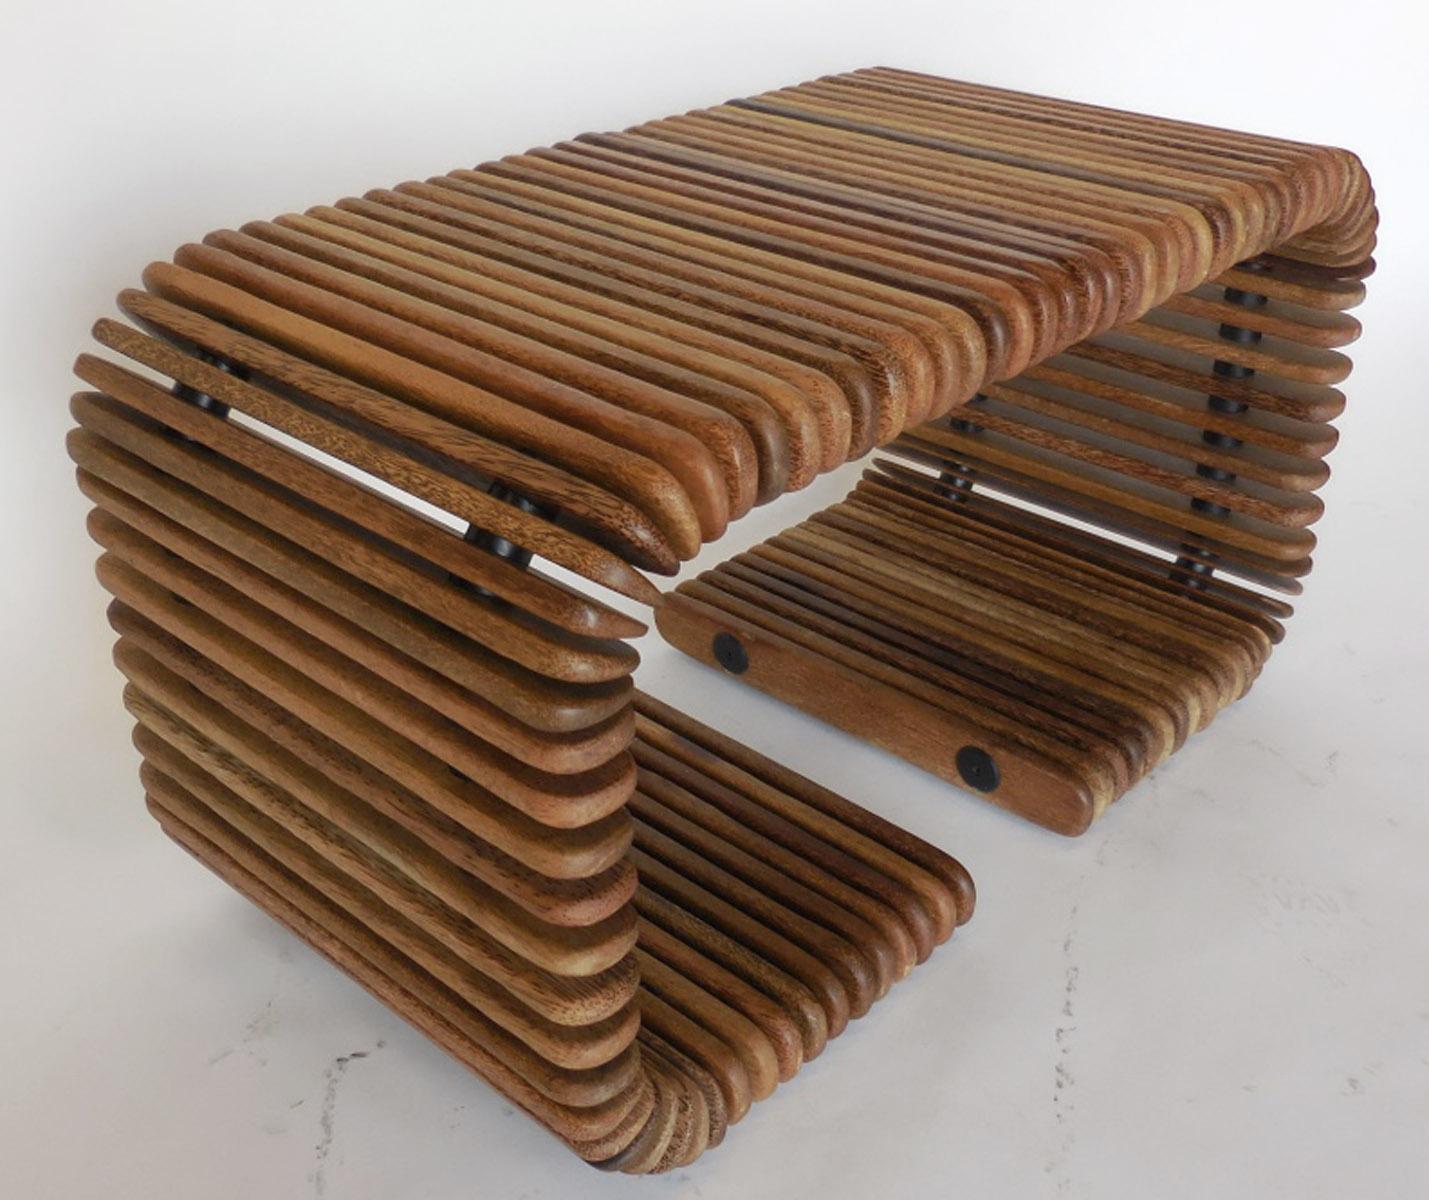 This is a coffee table that can separated into two side tables. Made in Australia, in the 1990s. Constructed by palm wood slices held together by interior metal rods. Beautiful variegated colors throughout sustainable tropical palm wood. The look is